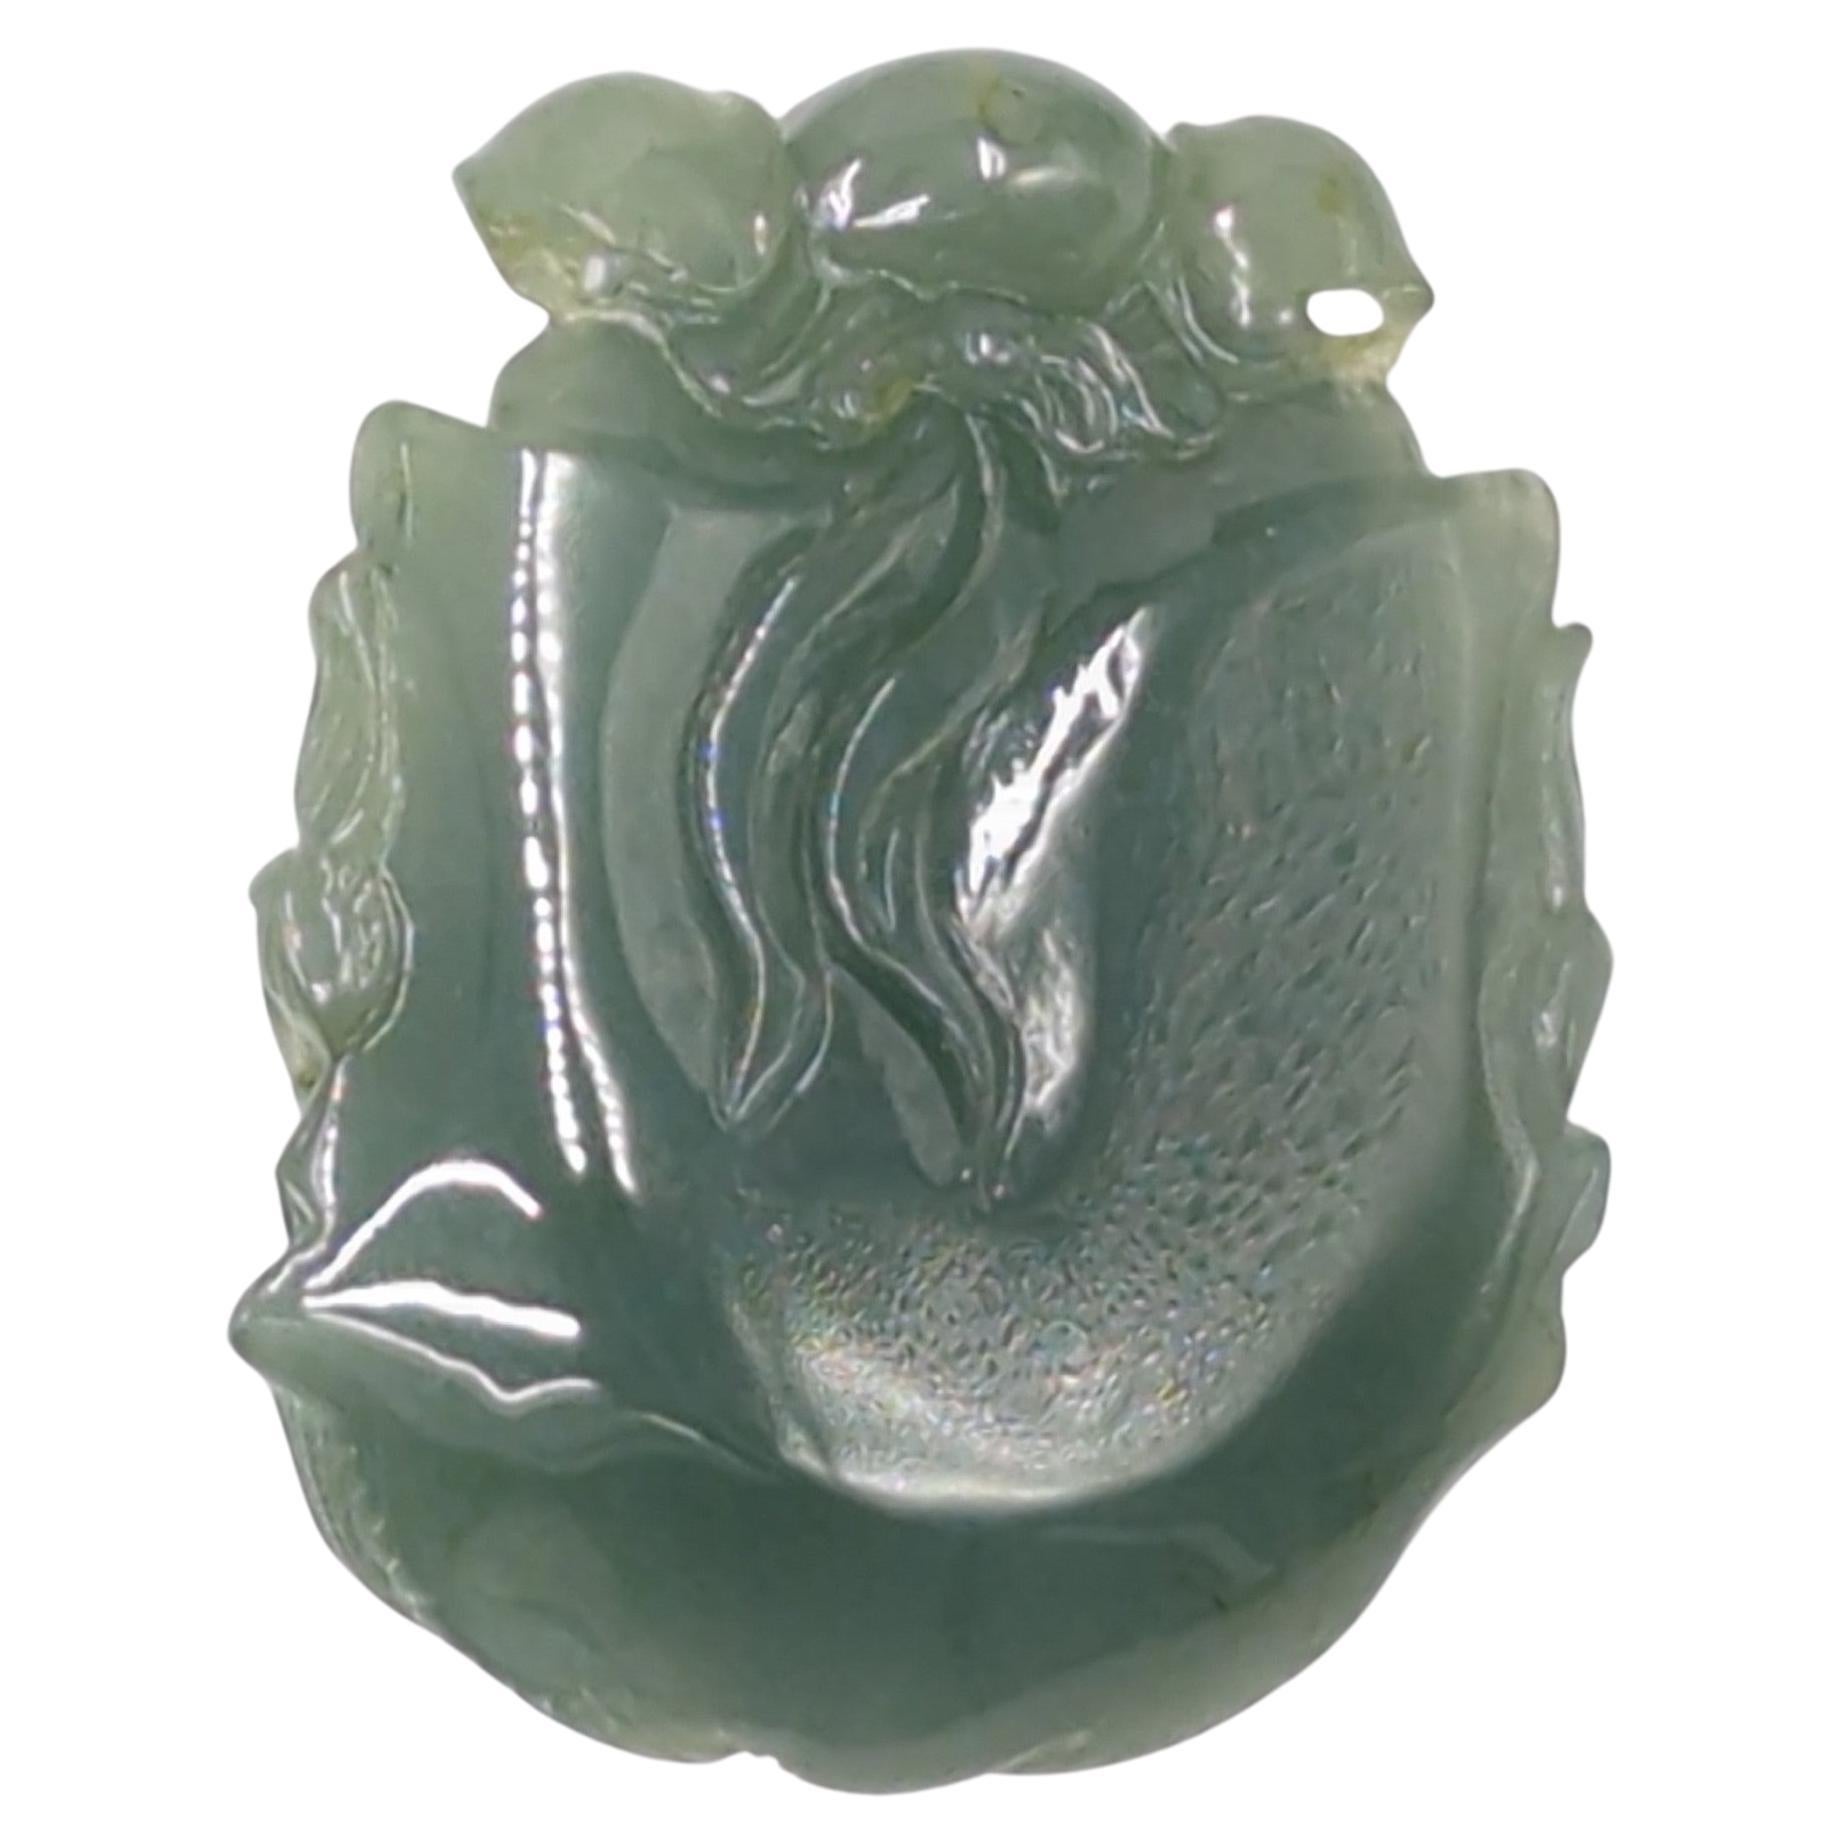 A large Chinese Suzhou workshop master artisan hand carved jadeite (natural A-grade) pendant in the form of Zhong Kui (Demon Queller in Chinese mythology) head. The details of this impressive pendant are very finely carved, and the natural jadeite